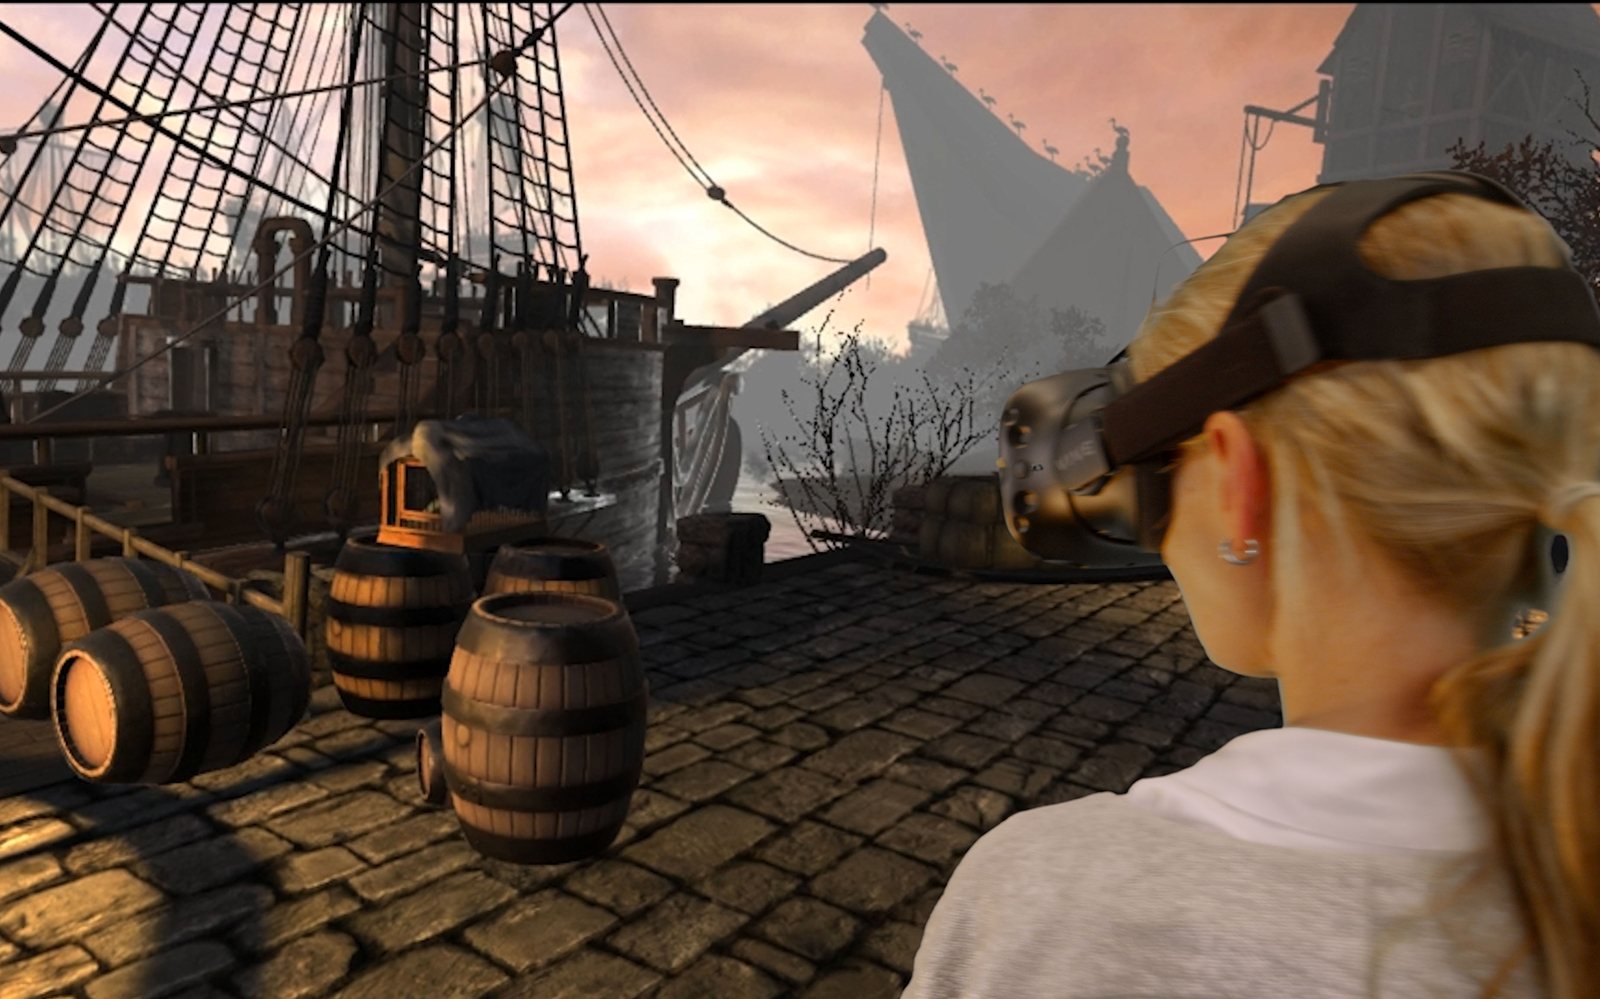 Image of Historium Bruges Skip the Line Tickets With Optional Access To Historium Virtual Reality